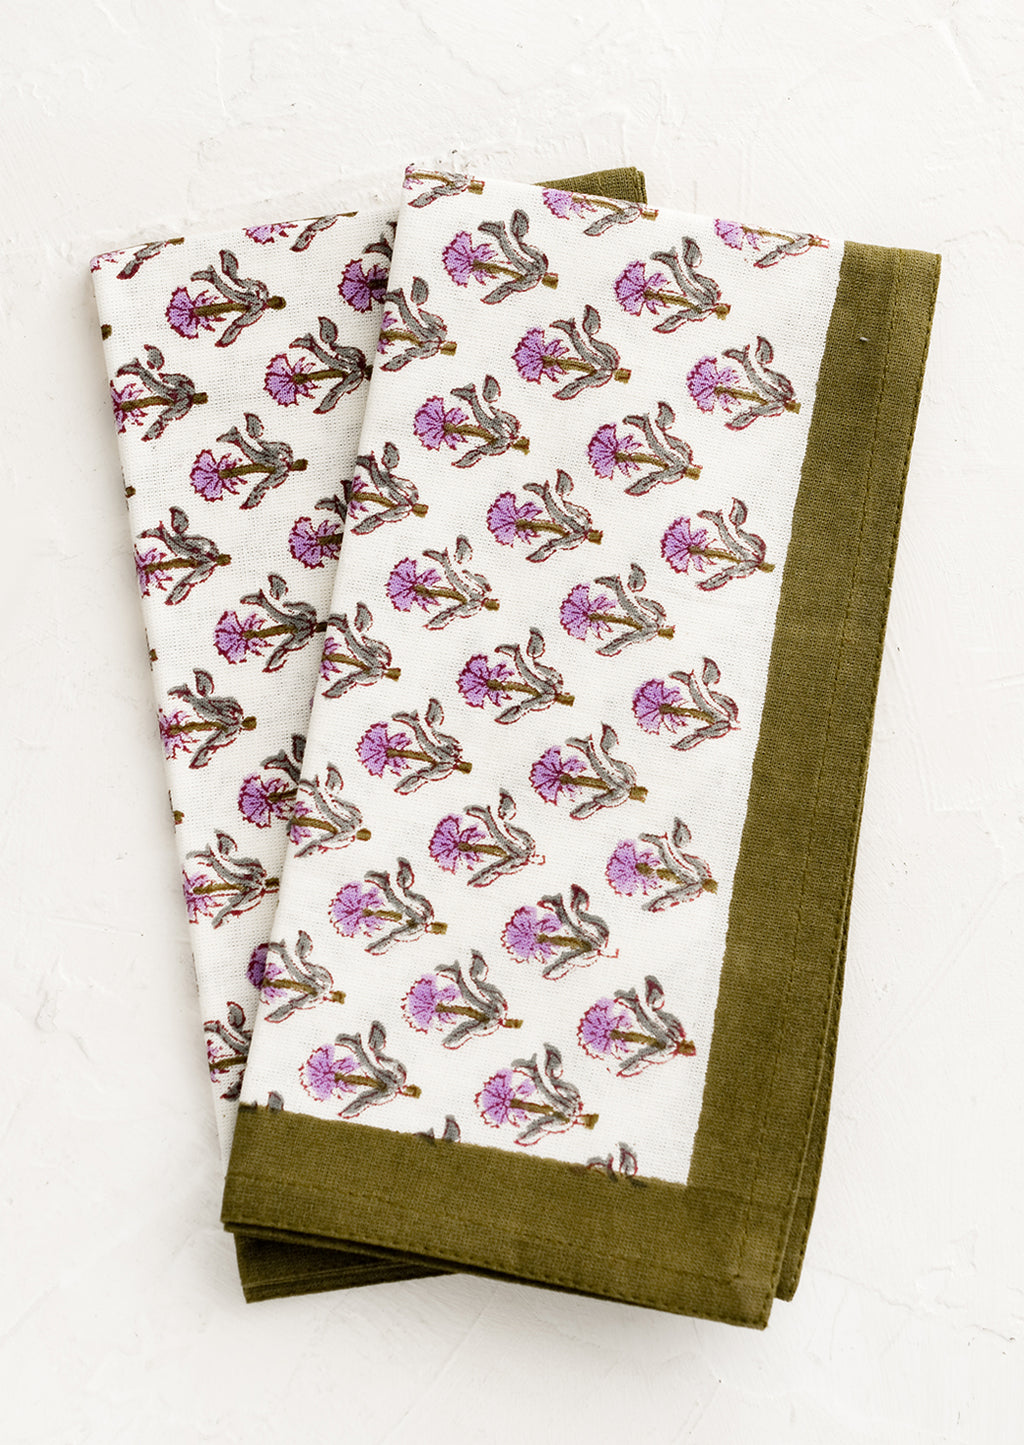 Olive Multi: A pair of block printed floral napkins in olive and purple.